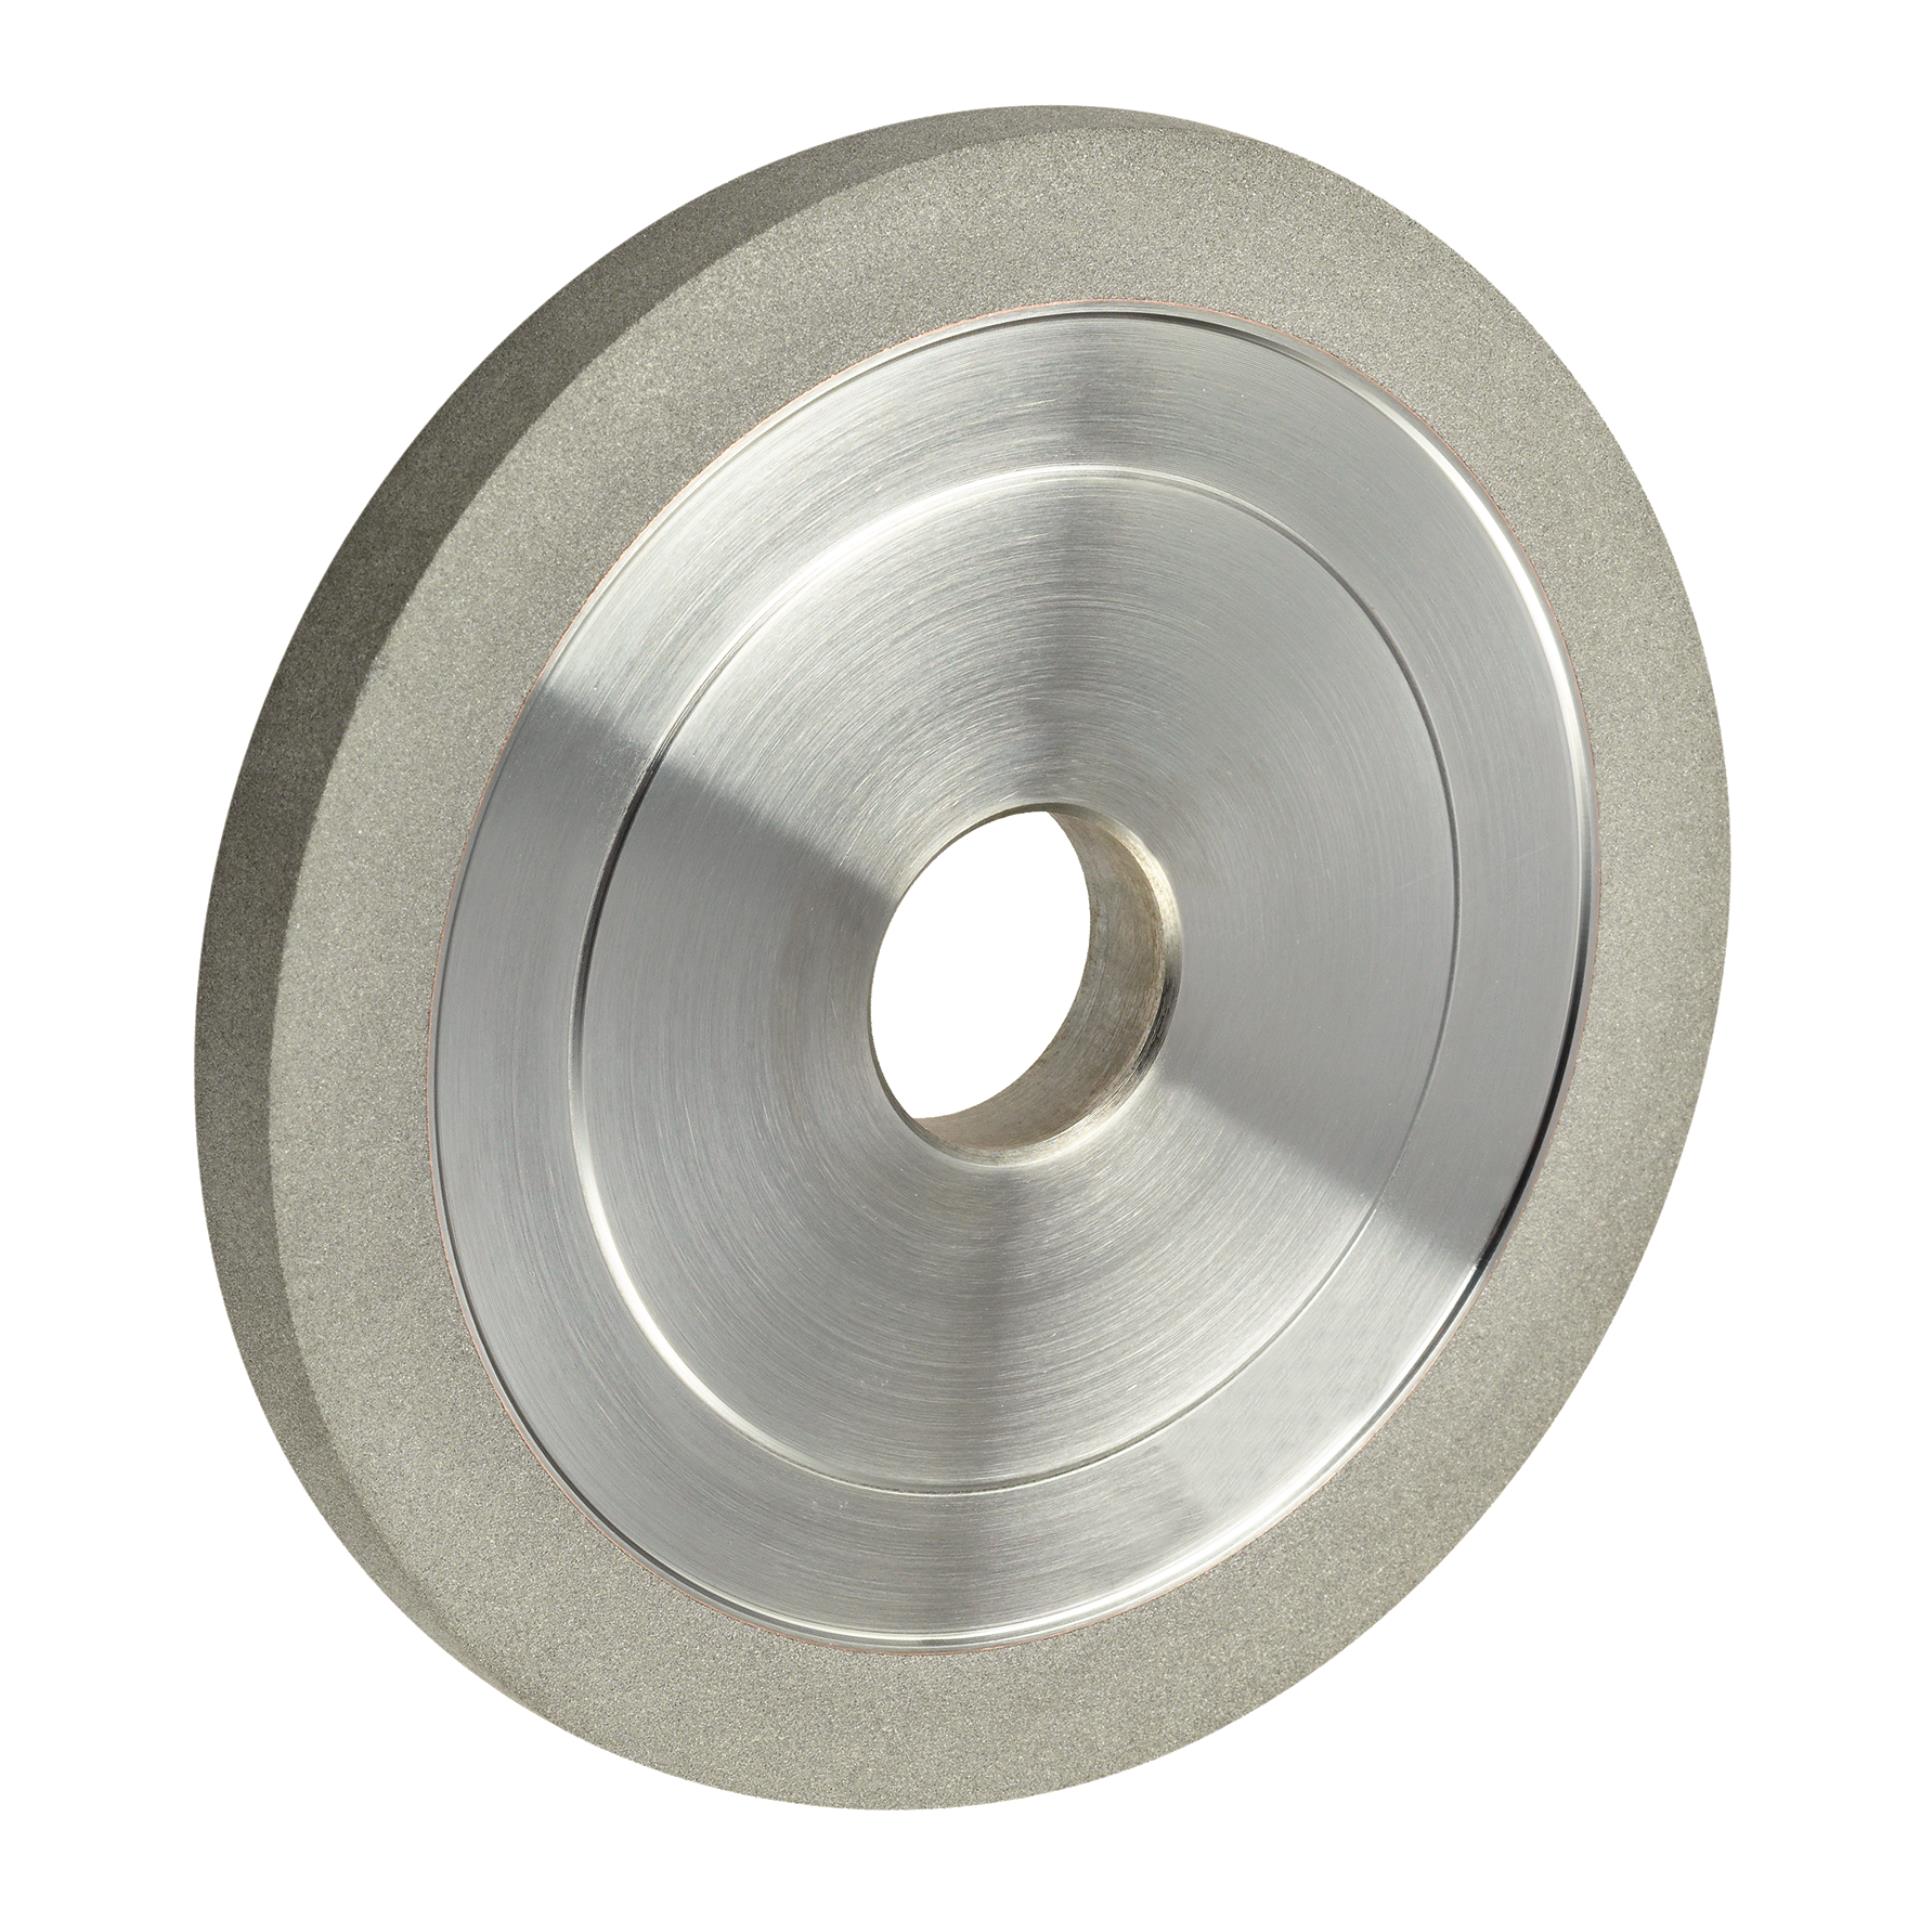 150mm Diamond Grinding Wheel Disc 150 Grit For Grinding Carbide Rotating Tools 